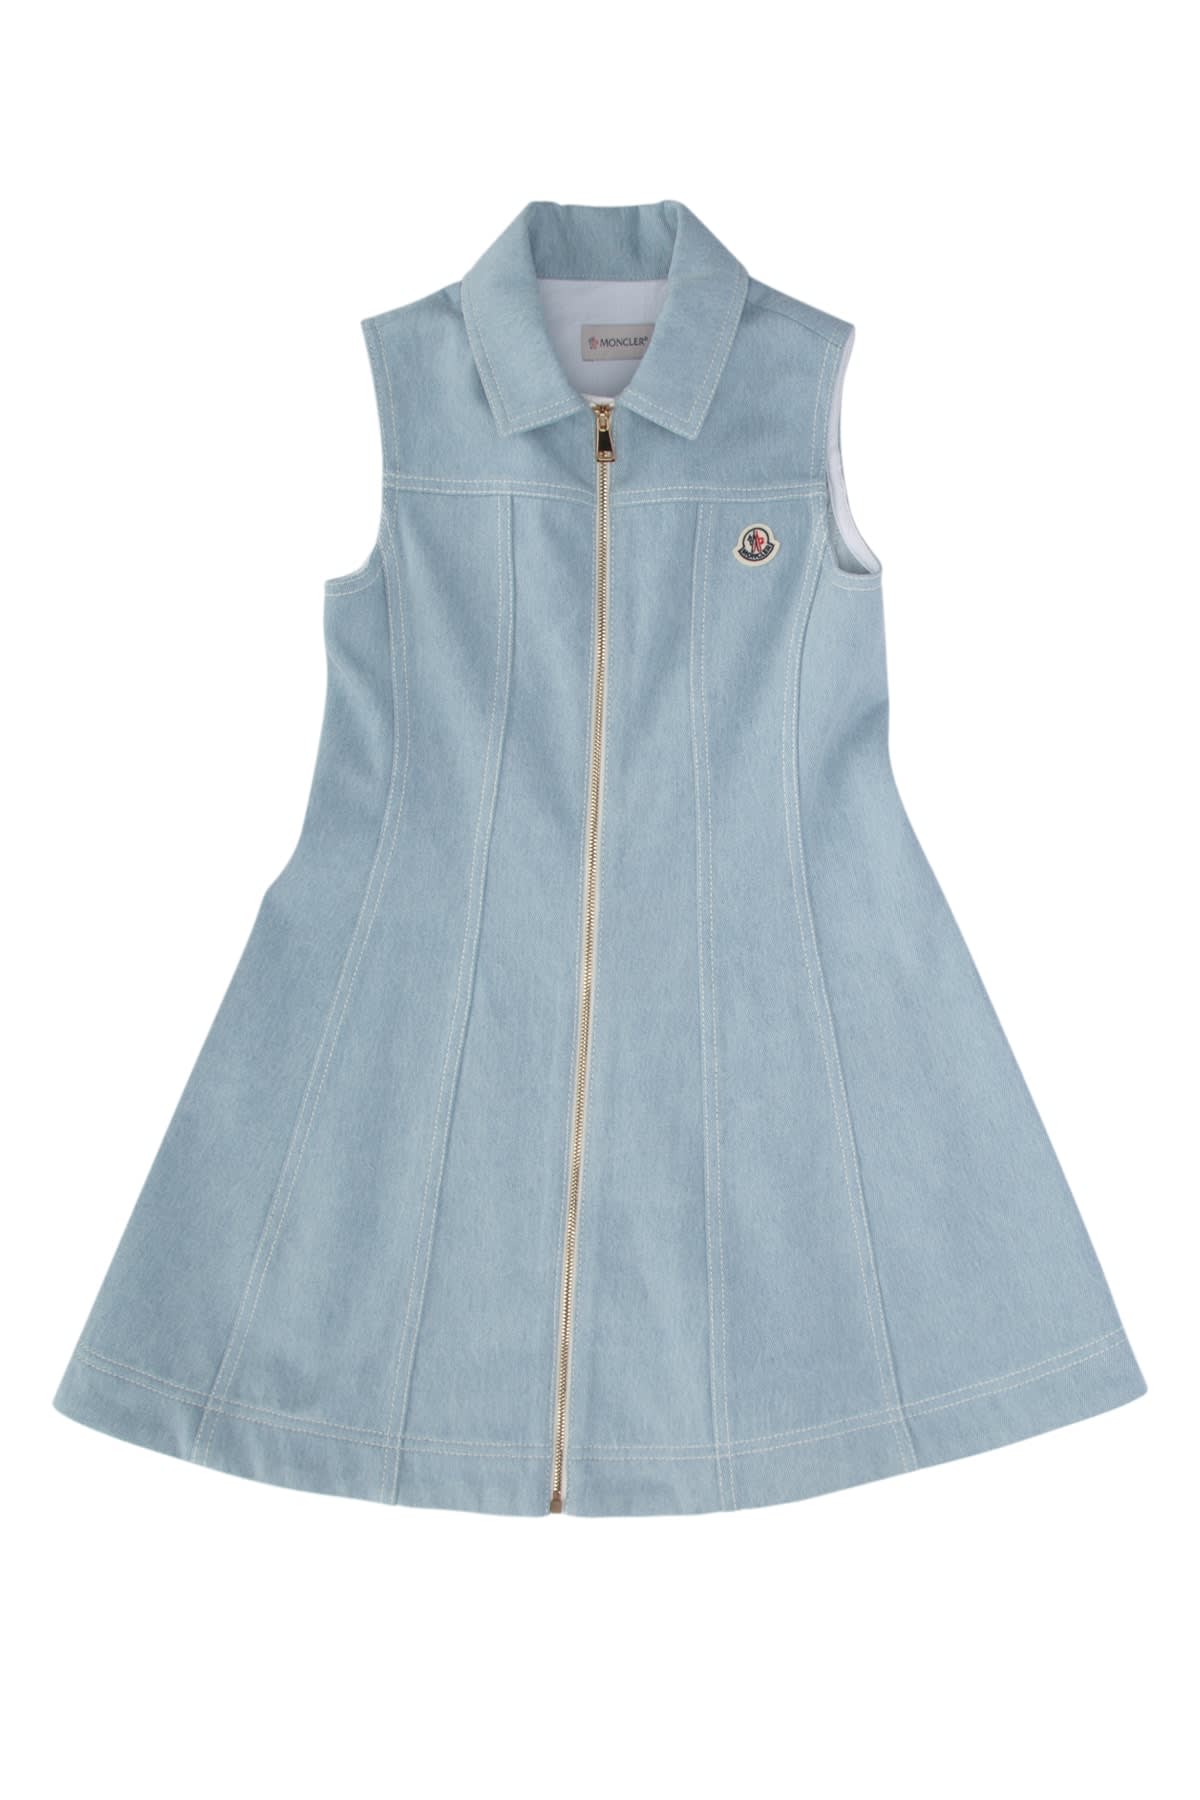 Moncler Kids' Abito In Blue